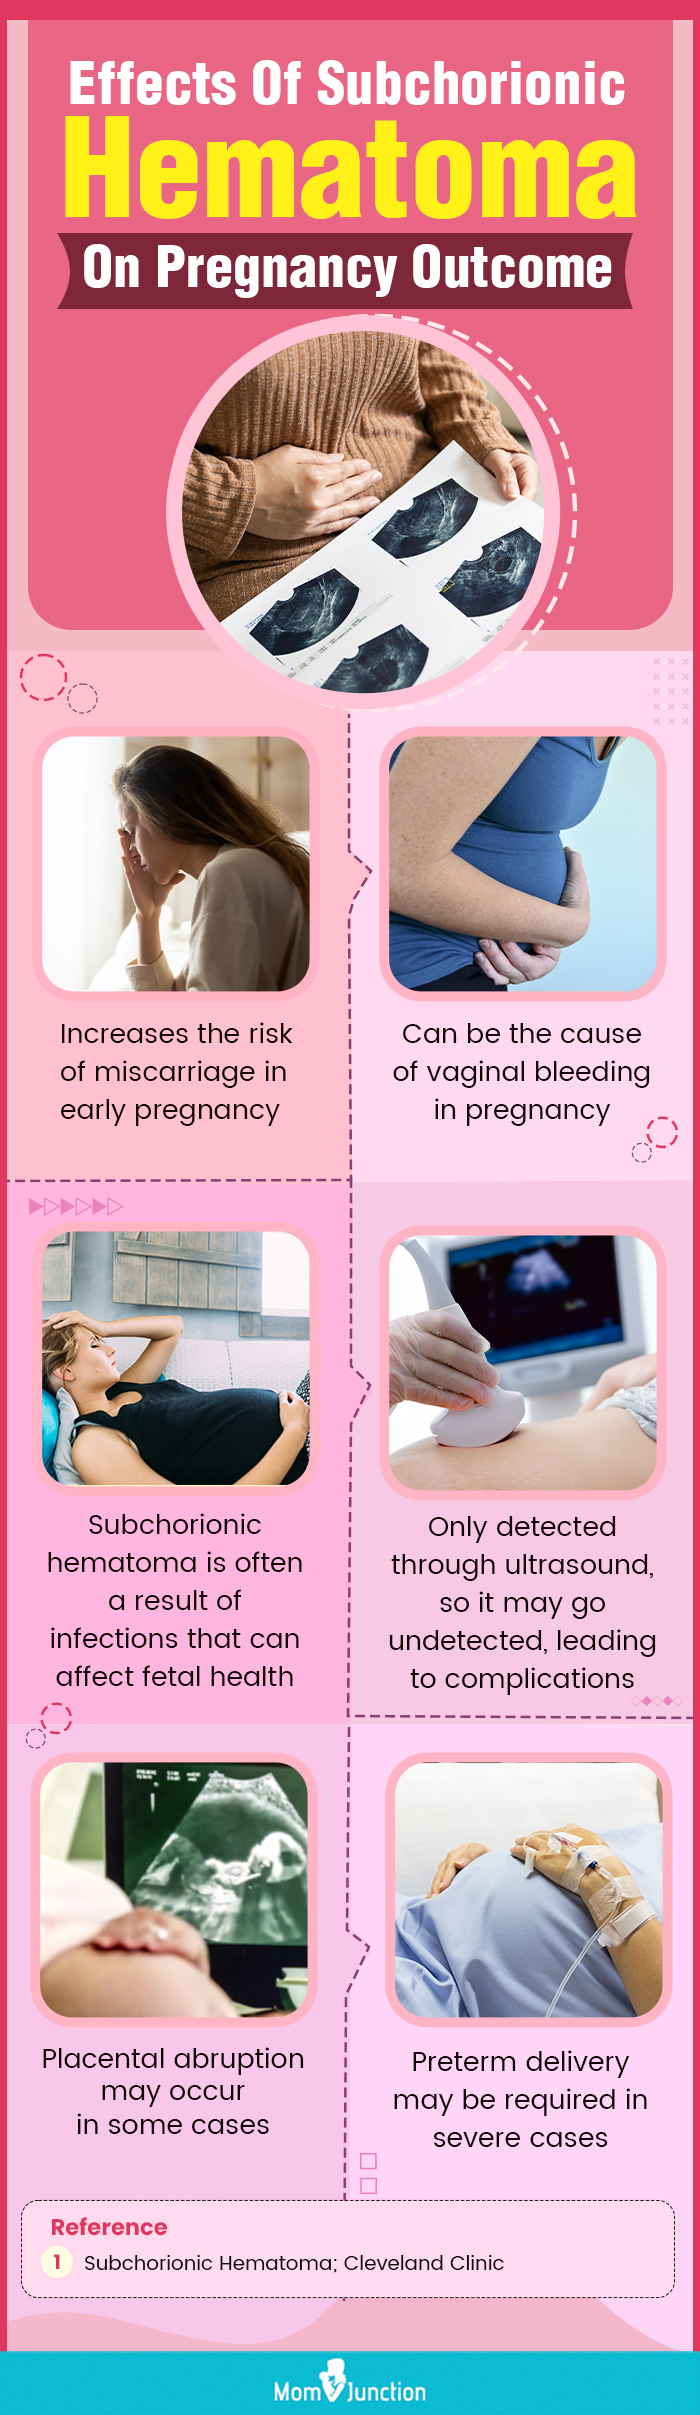 effects of subchorionic hematoma on pregnancy outcome (infographic)